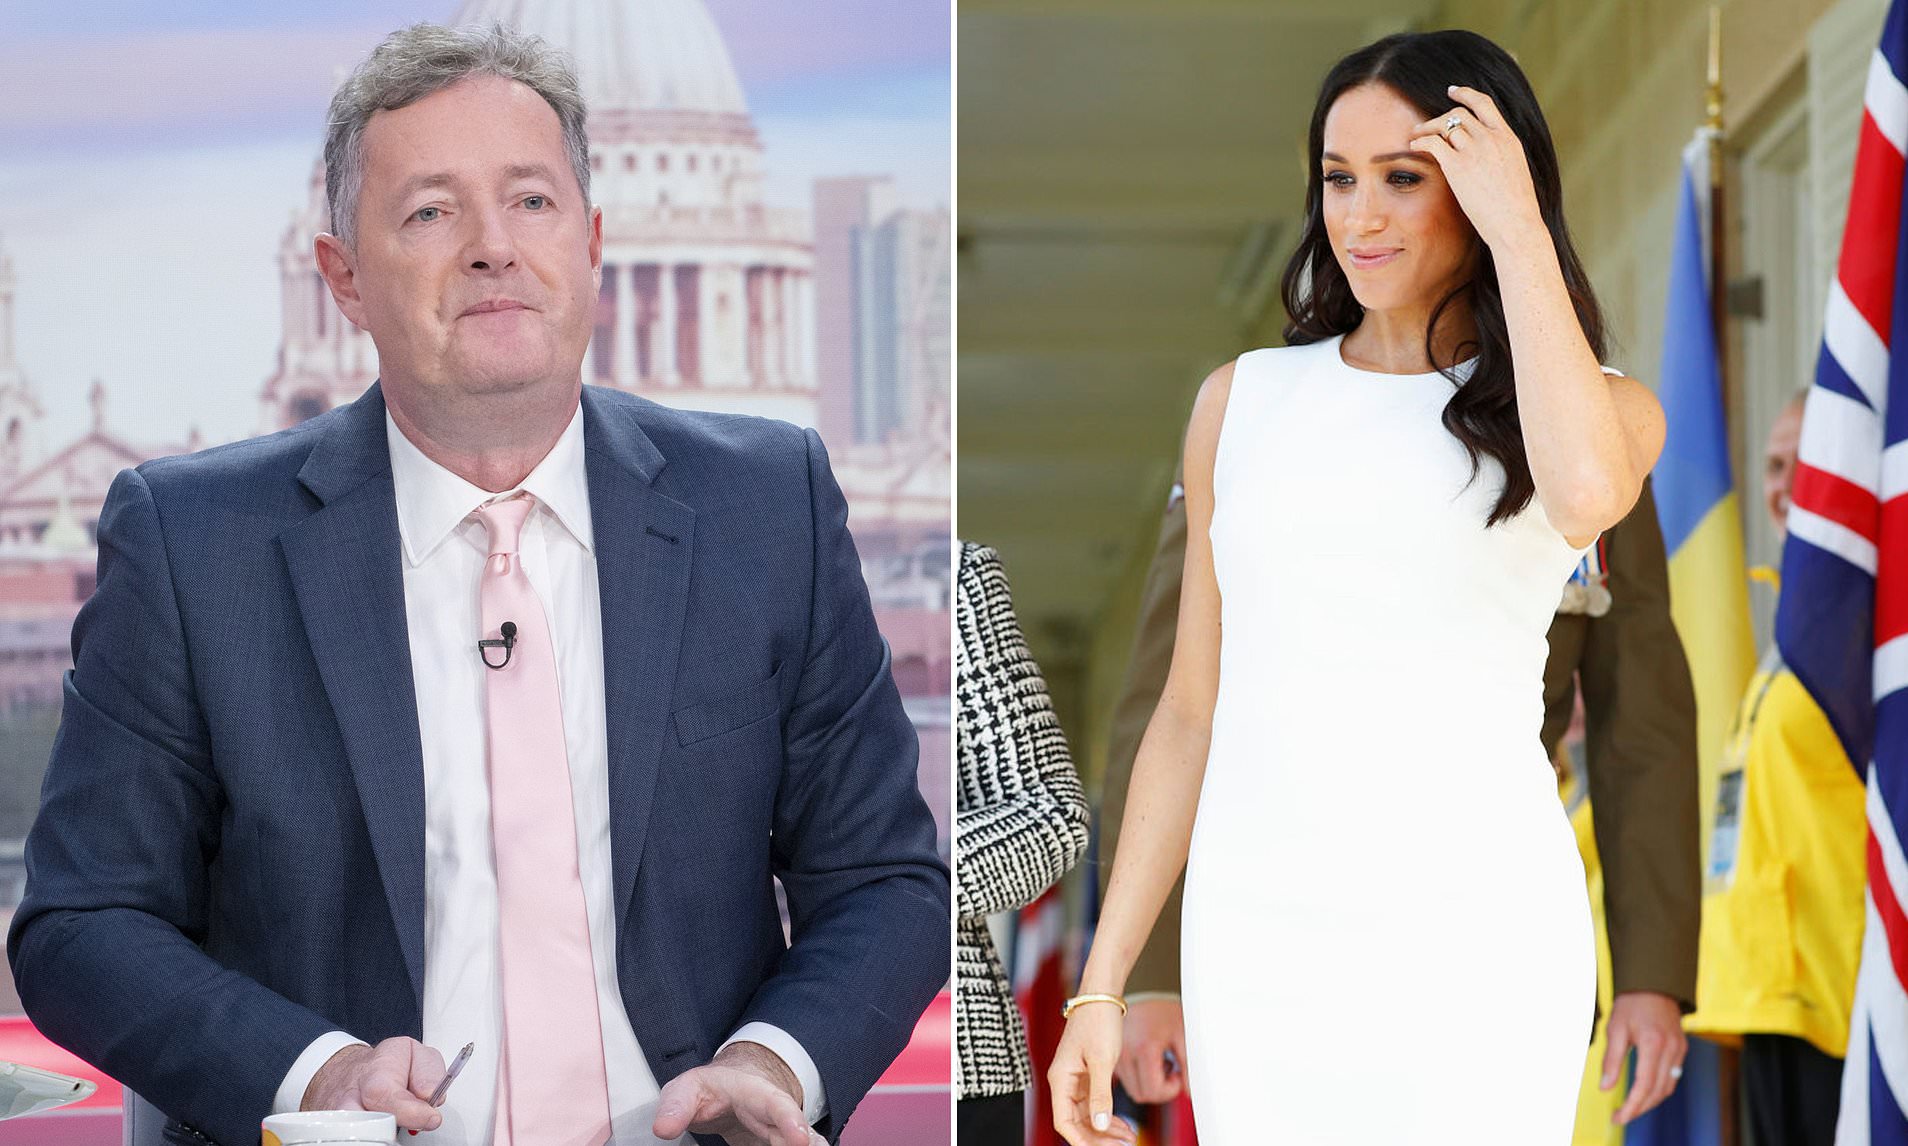 Piers Morgan admits to taking things too far with Meghan Markle criticism